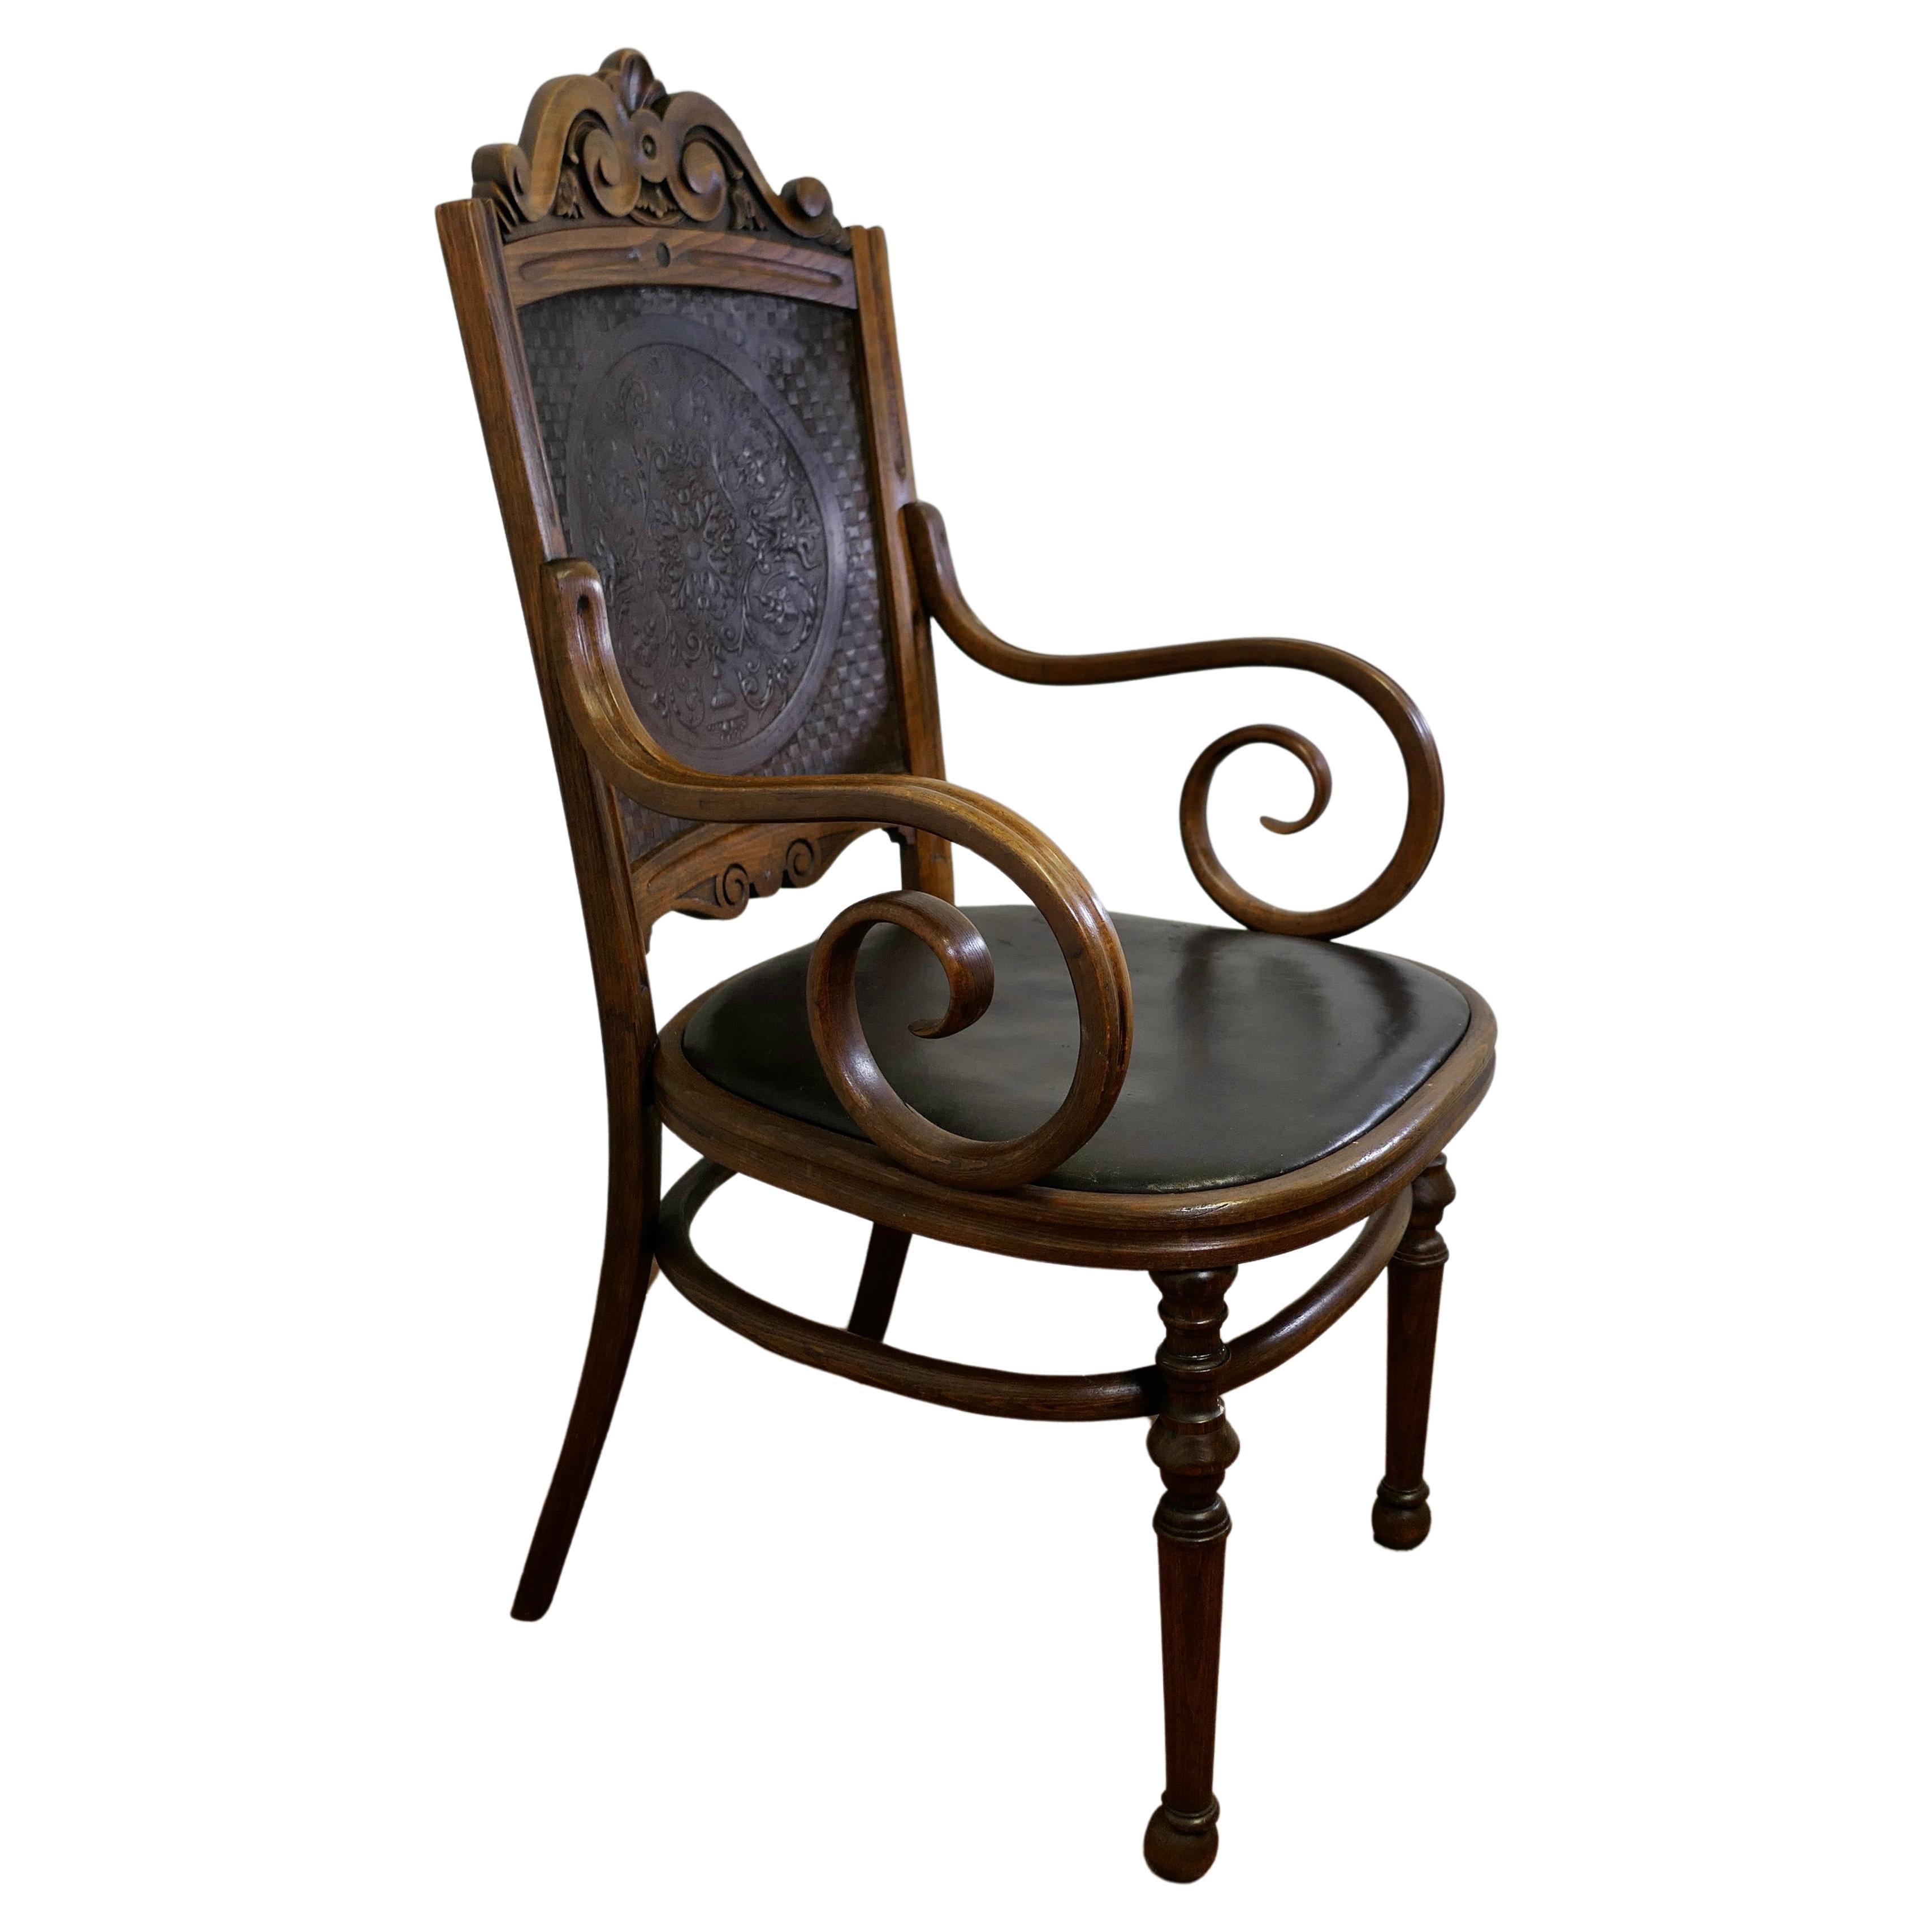 Victorian Upholstered Bentwood Salon or Desk Chair  This is a charming piece  For Sale